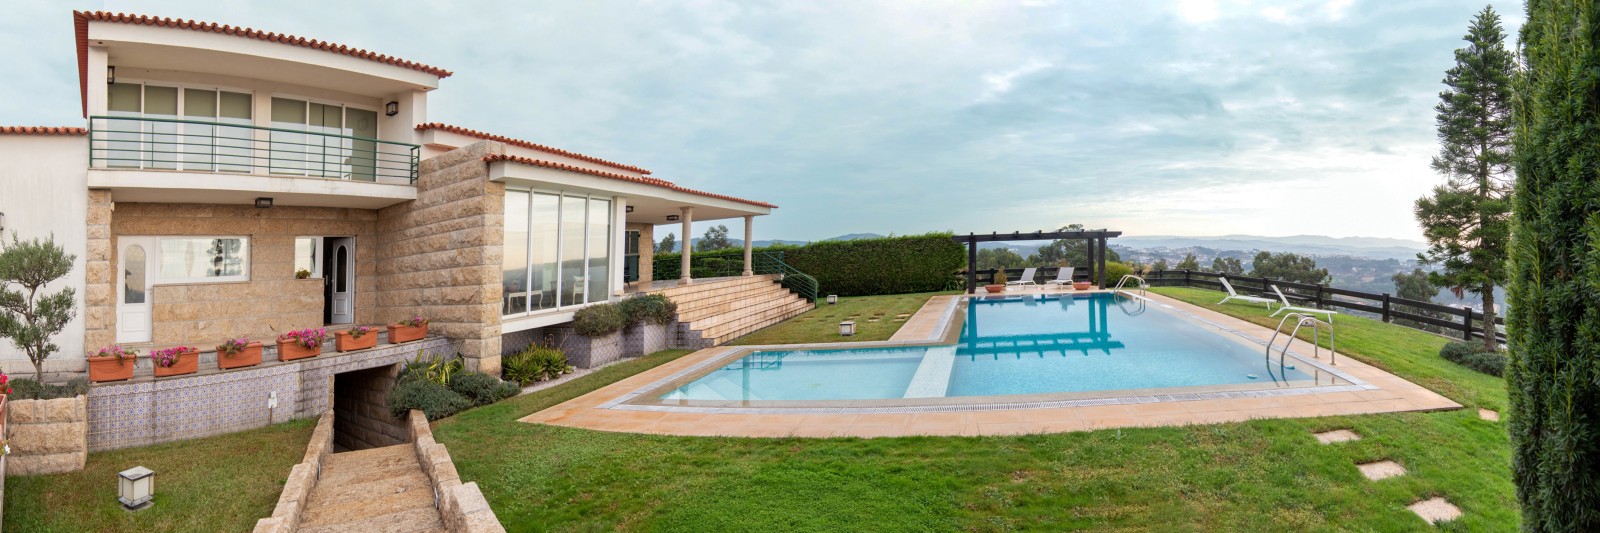 Six bedroom villa with pool, for sale, in Lousada, Portugal_248967